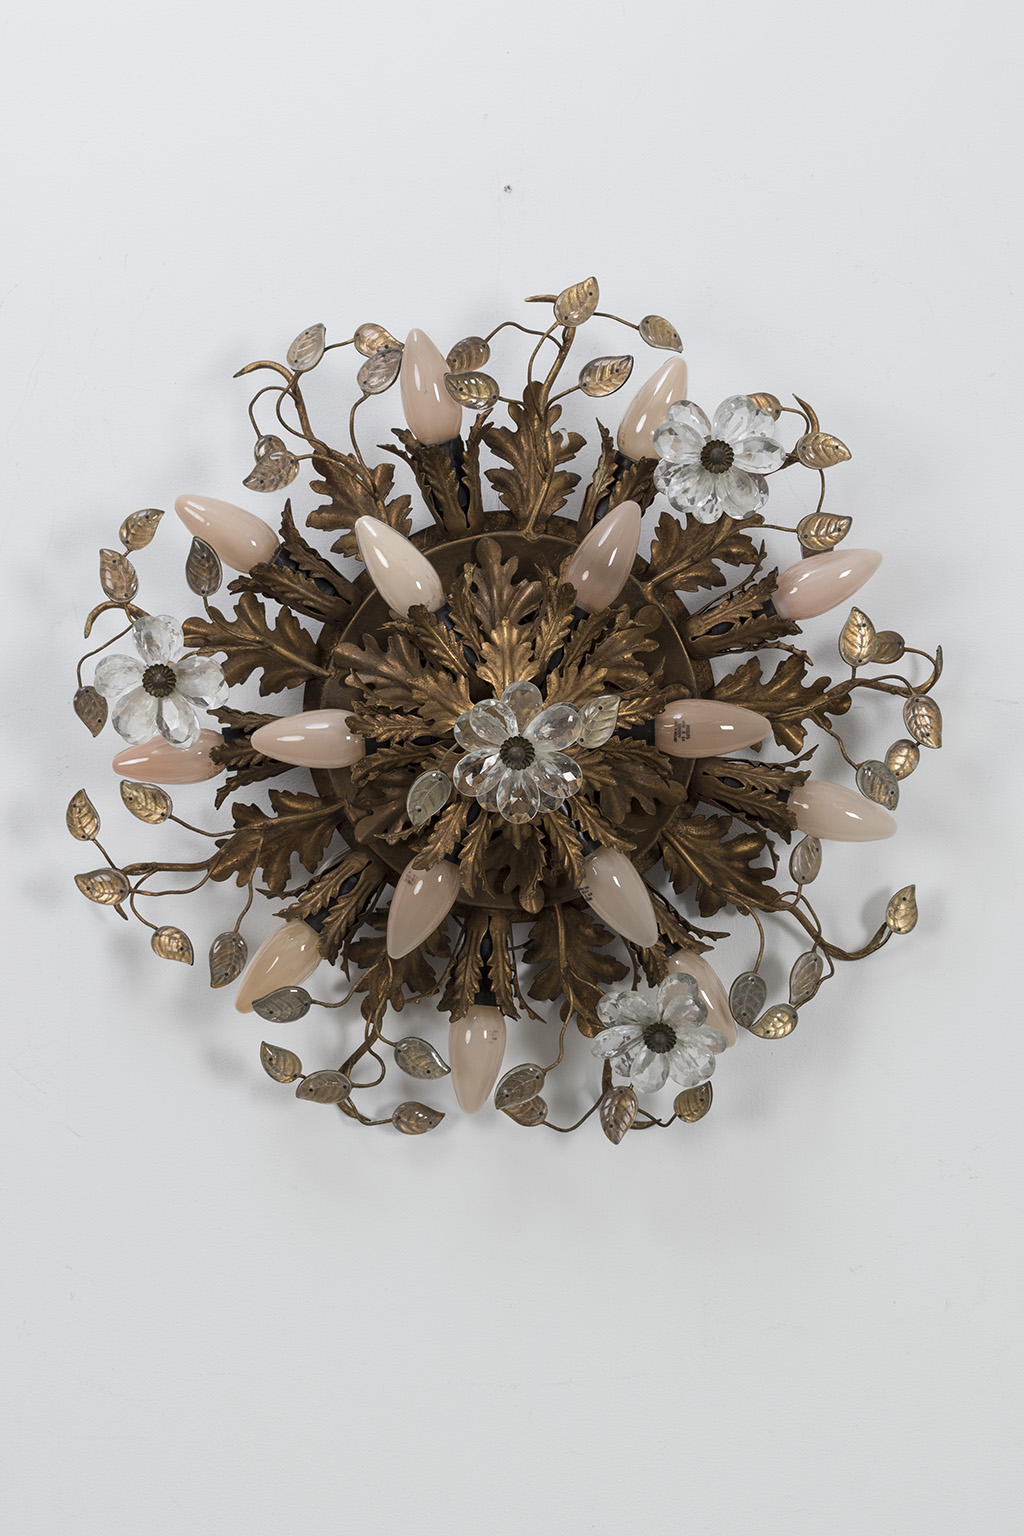 Banci Firenze ceiling light with floral design